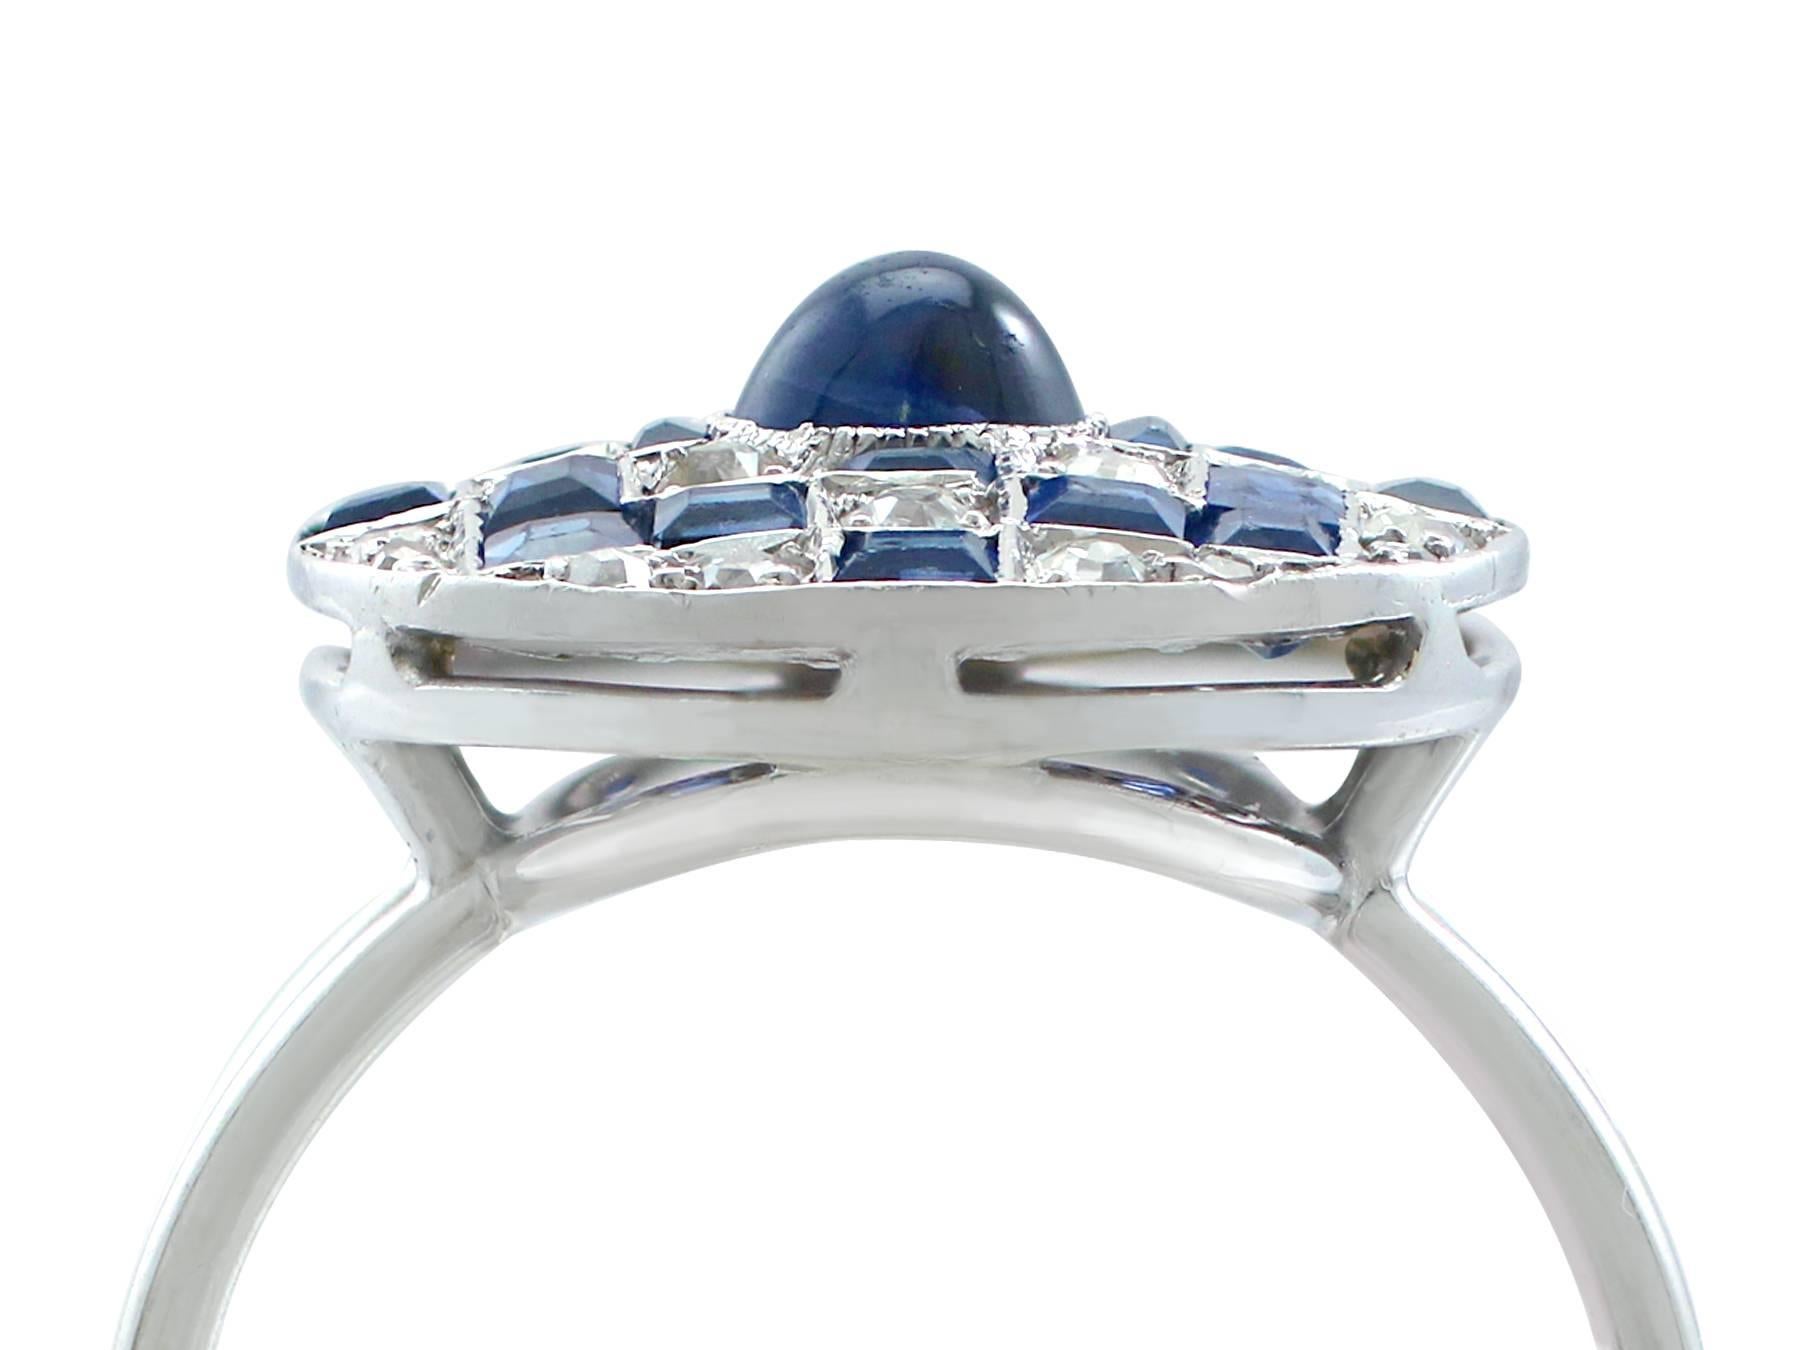 A stunning antique Art Deco 0.62 carat sapphire and 0.33 carat diamond, 18 karat white gold dress ring; part of our diverse gemstone jewelry collections

This stunning, fine and impressive vintage Art Deco diamond and sapphire ring has been crafted